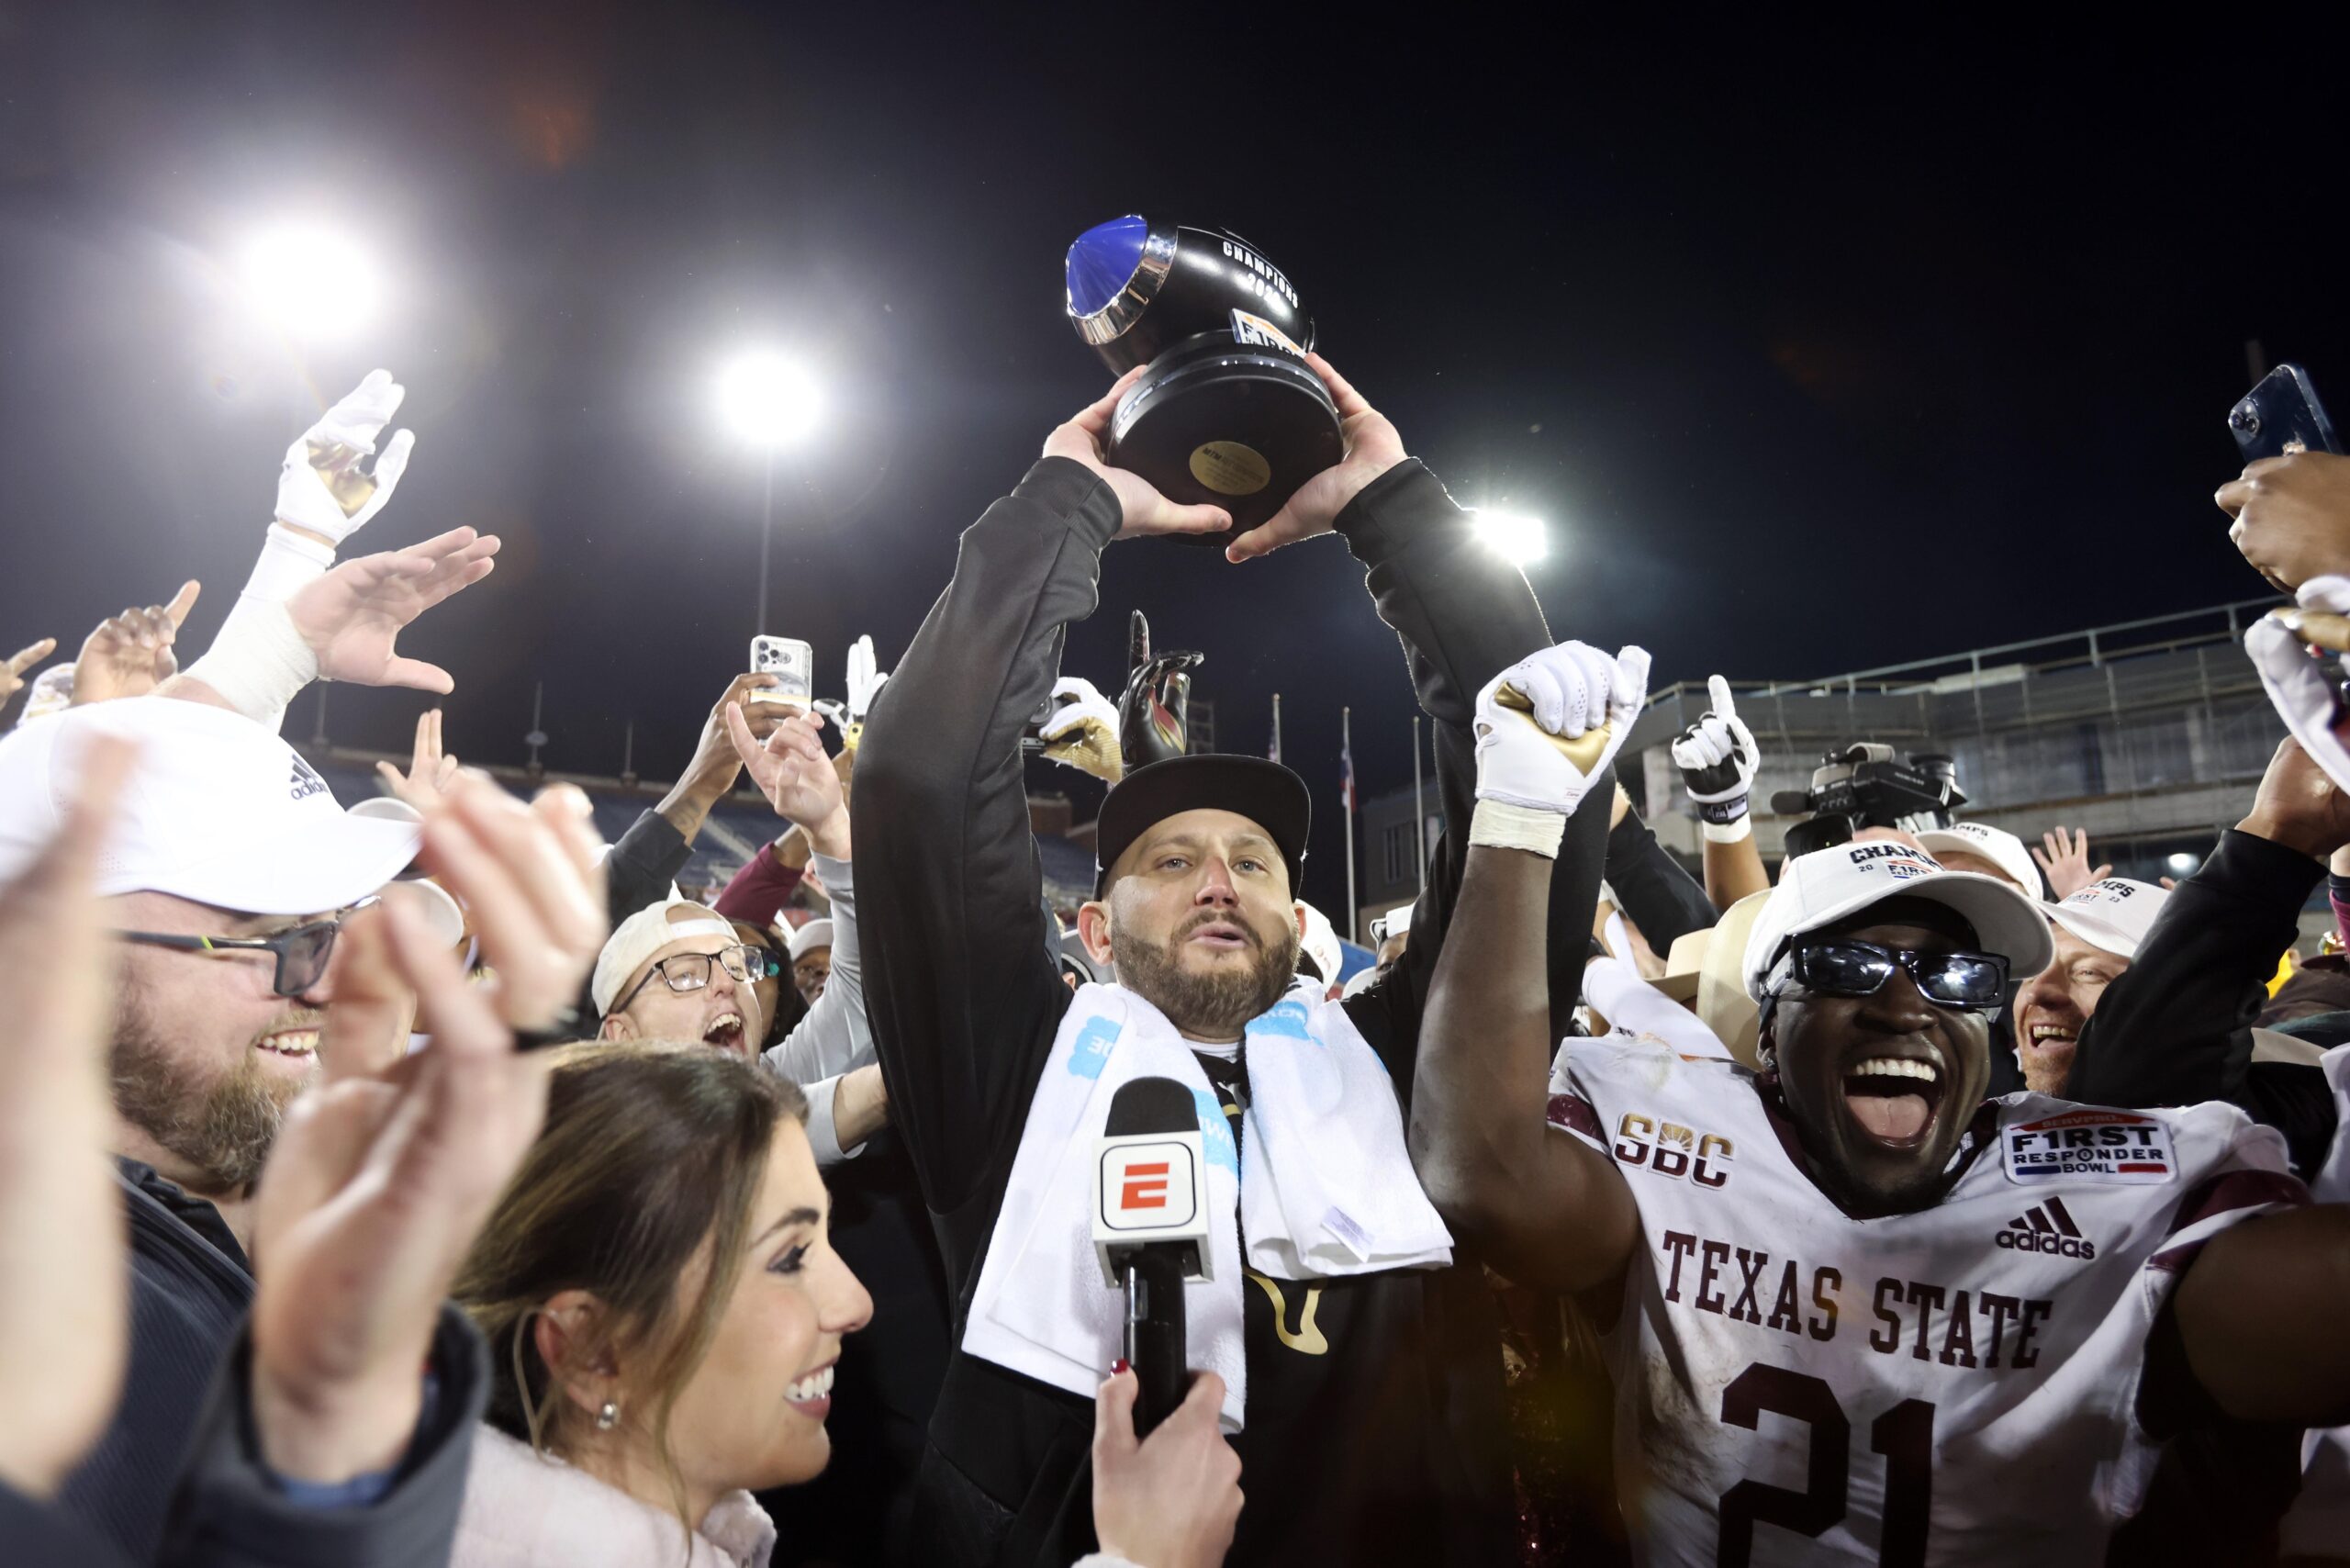 Stars are bright for Texas State